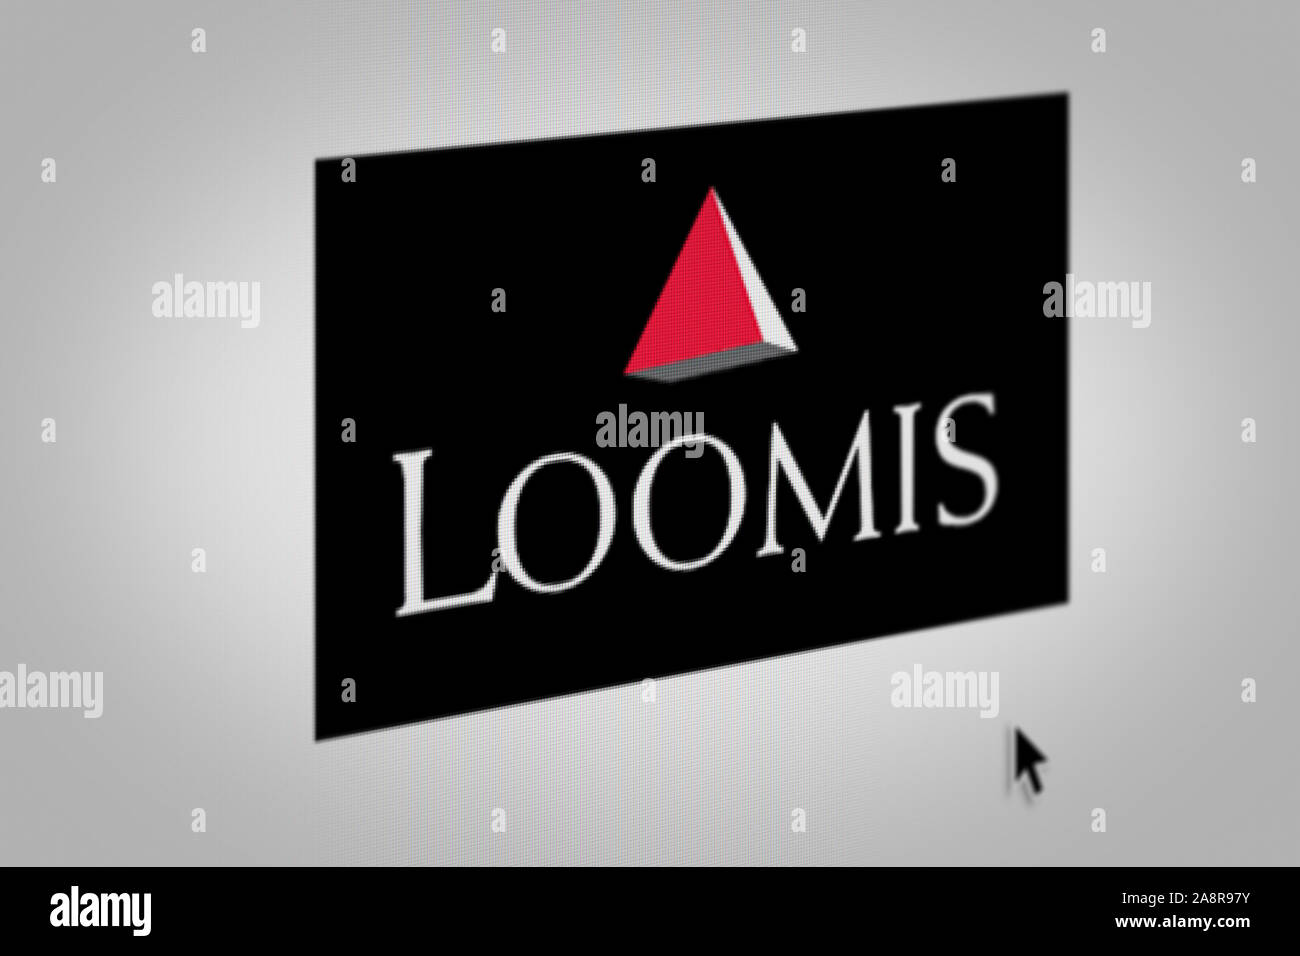 Logo of the public company Loomis displayed on a computer screen